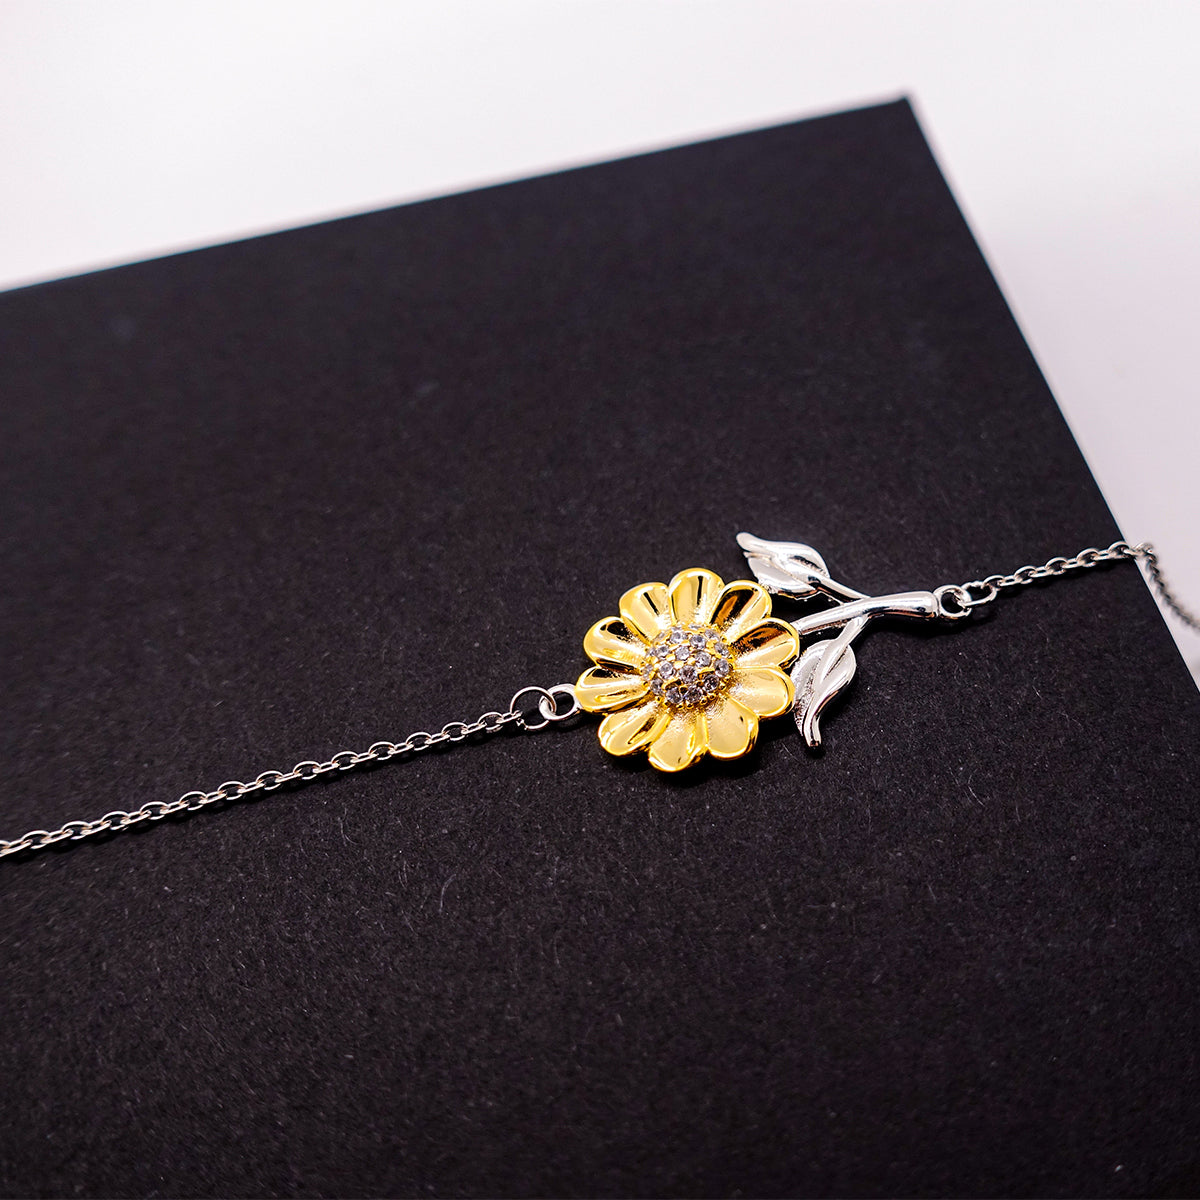 Mothers Sunflower Bracelet - Youll Always Hold a Special Place in My Heart, Birthday Gift for Her, Unique Engraved Jewelry, Mothers Day, Christmas, Inspirational Confidence